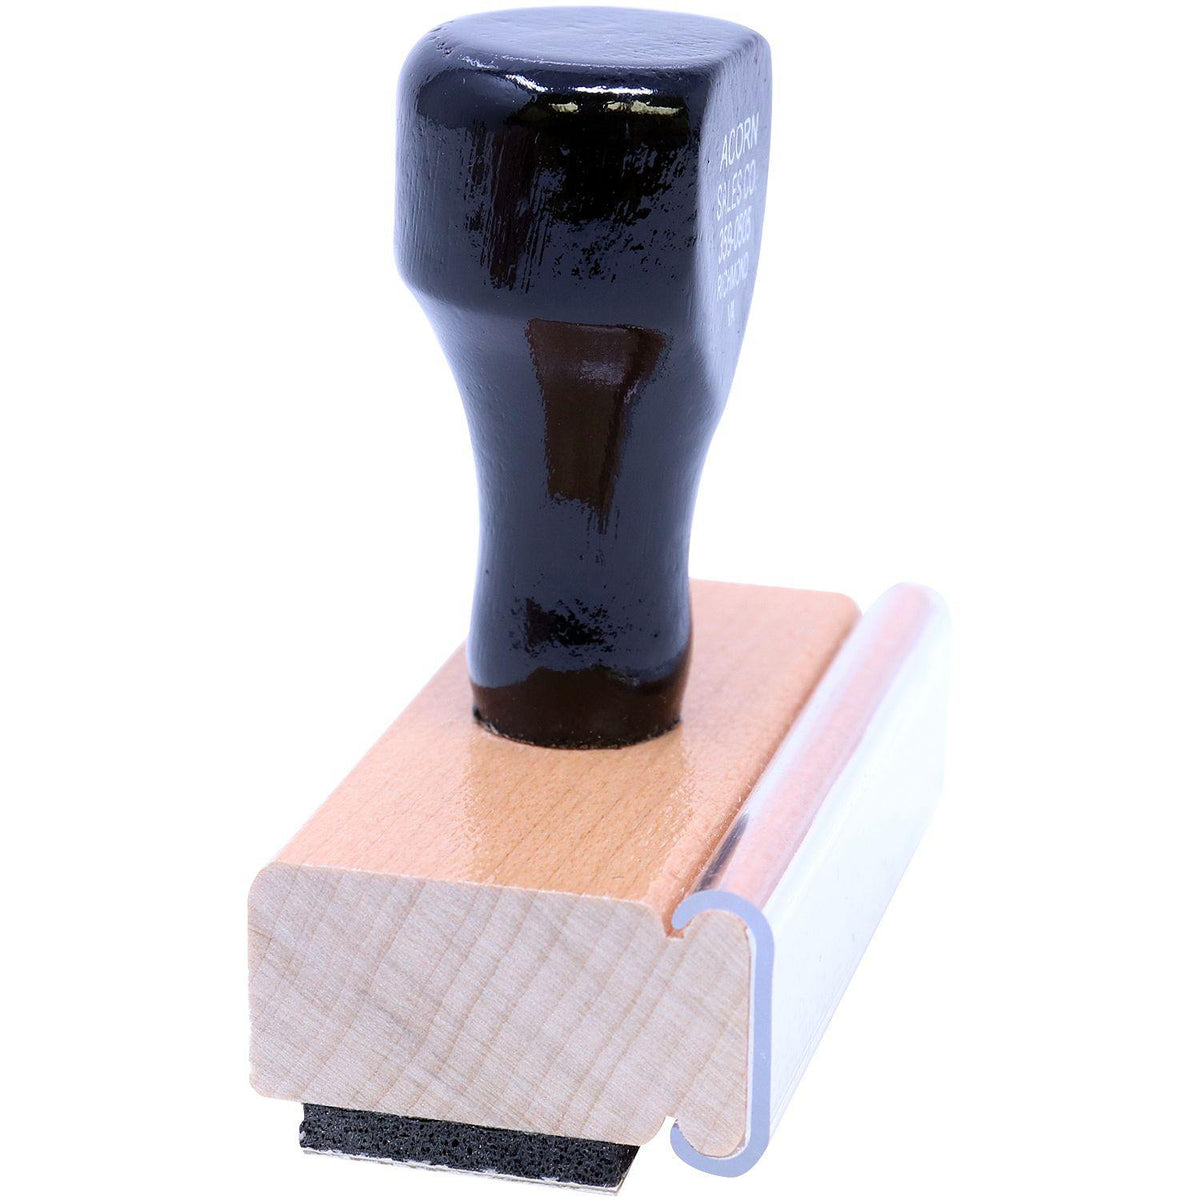 Side View of Banco Rubber Stamp at an Angle